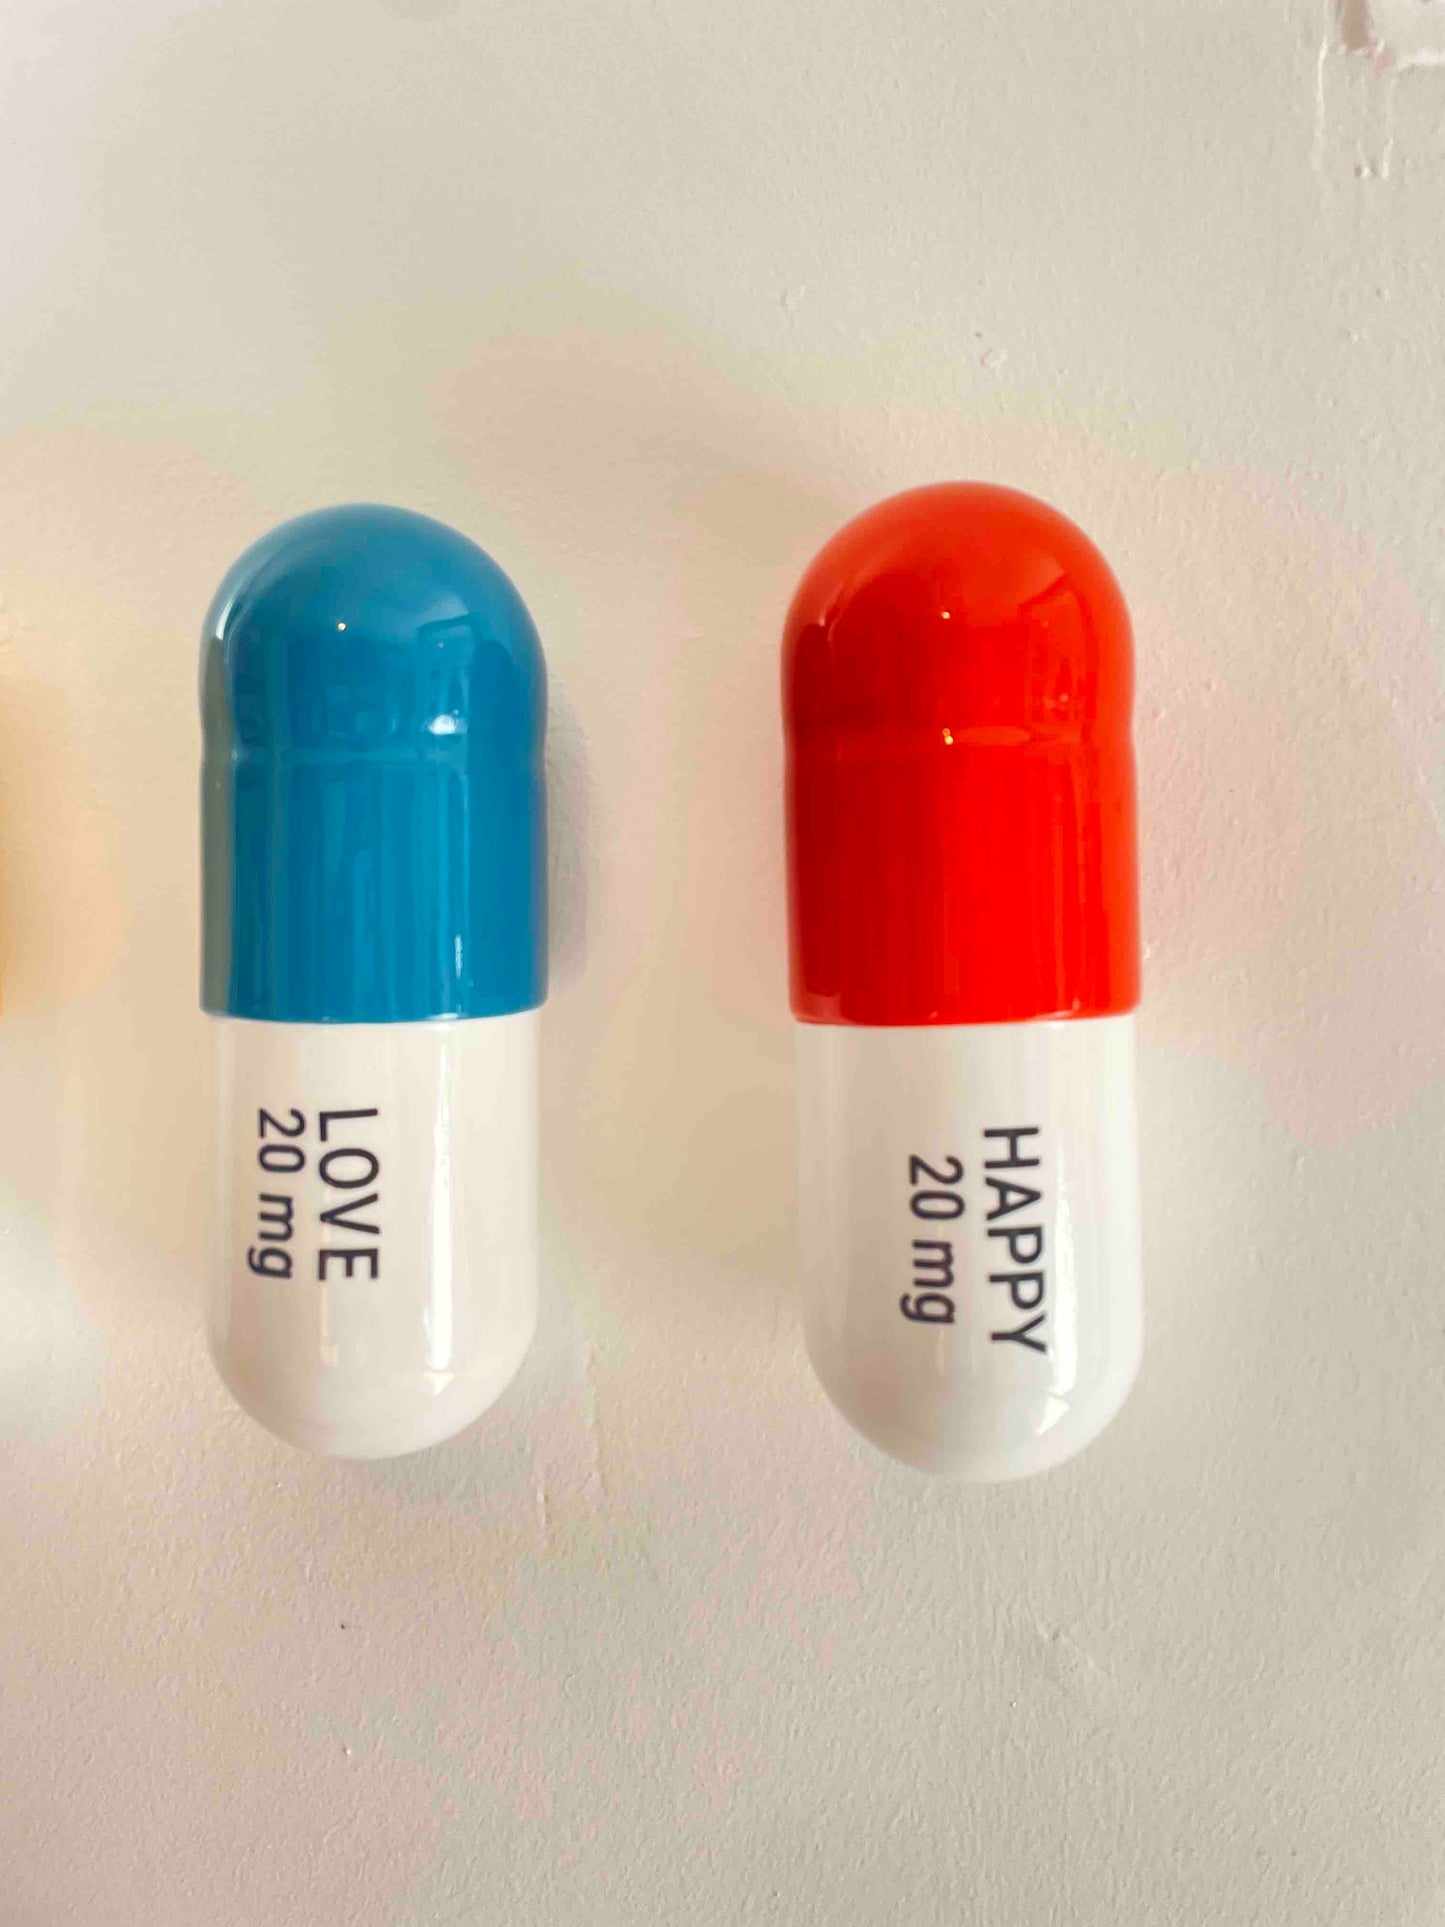 20 MG Happy pill Combo (Turquoise, yellow and orange) - figurative sculpture